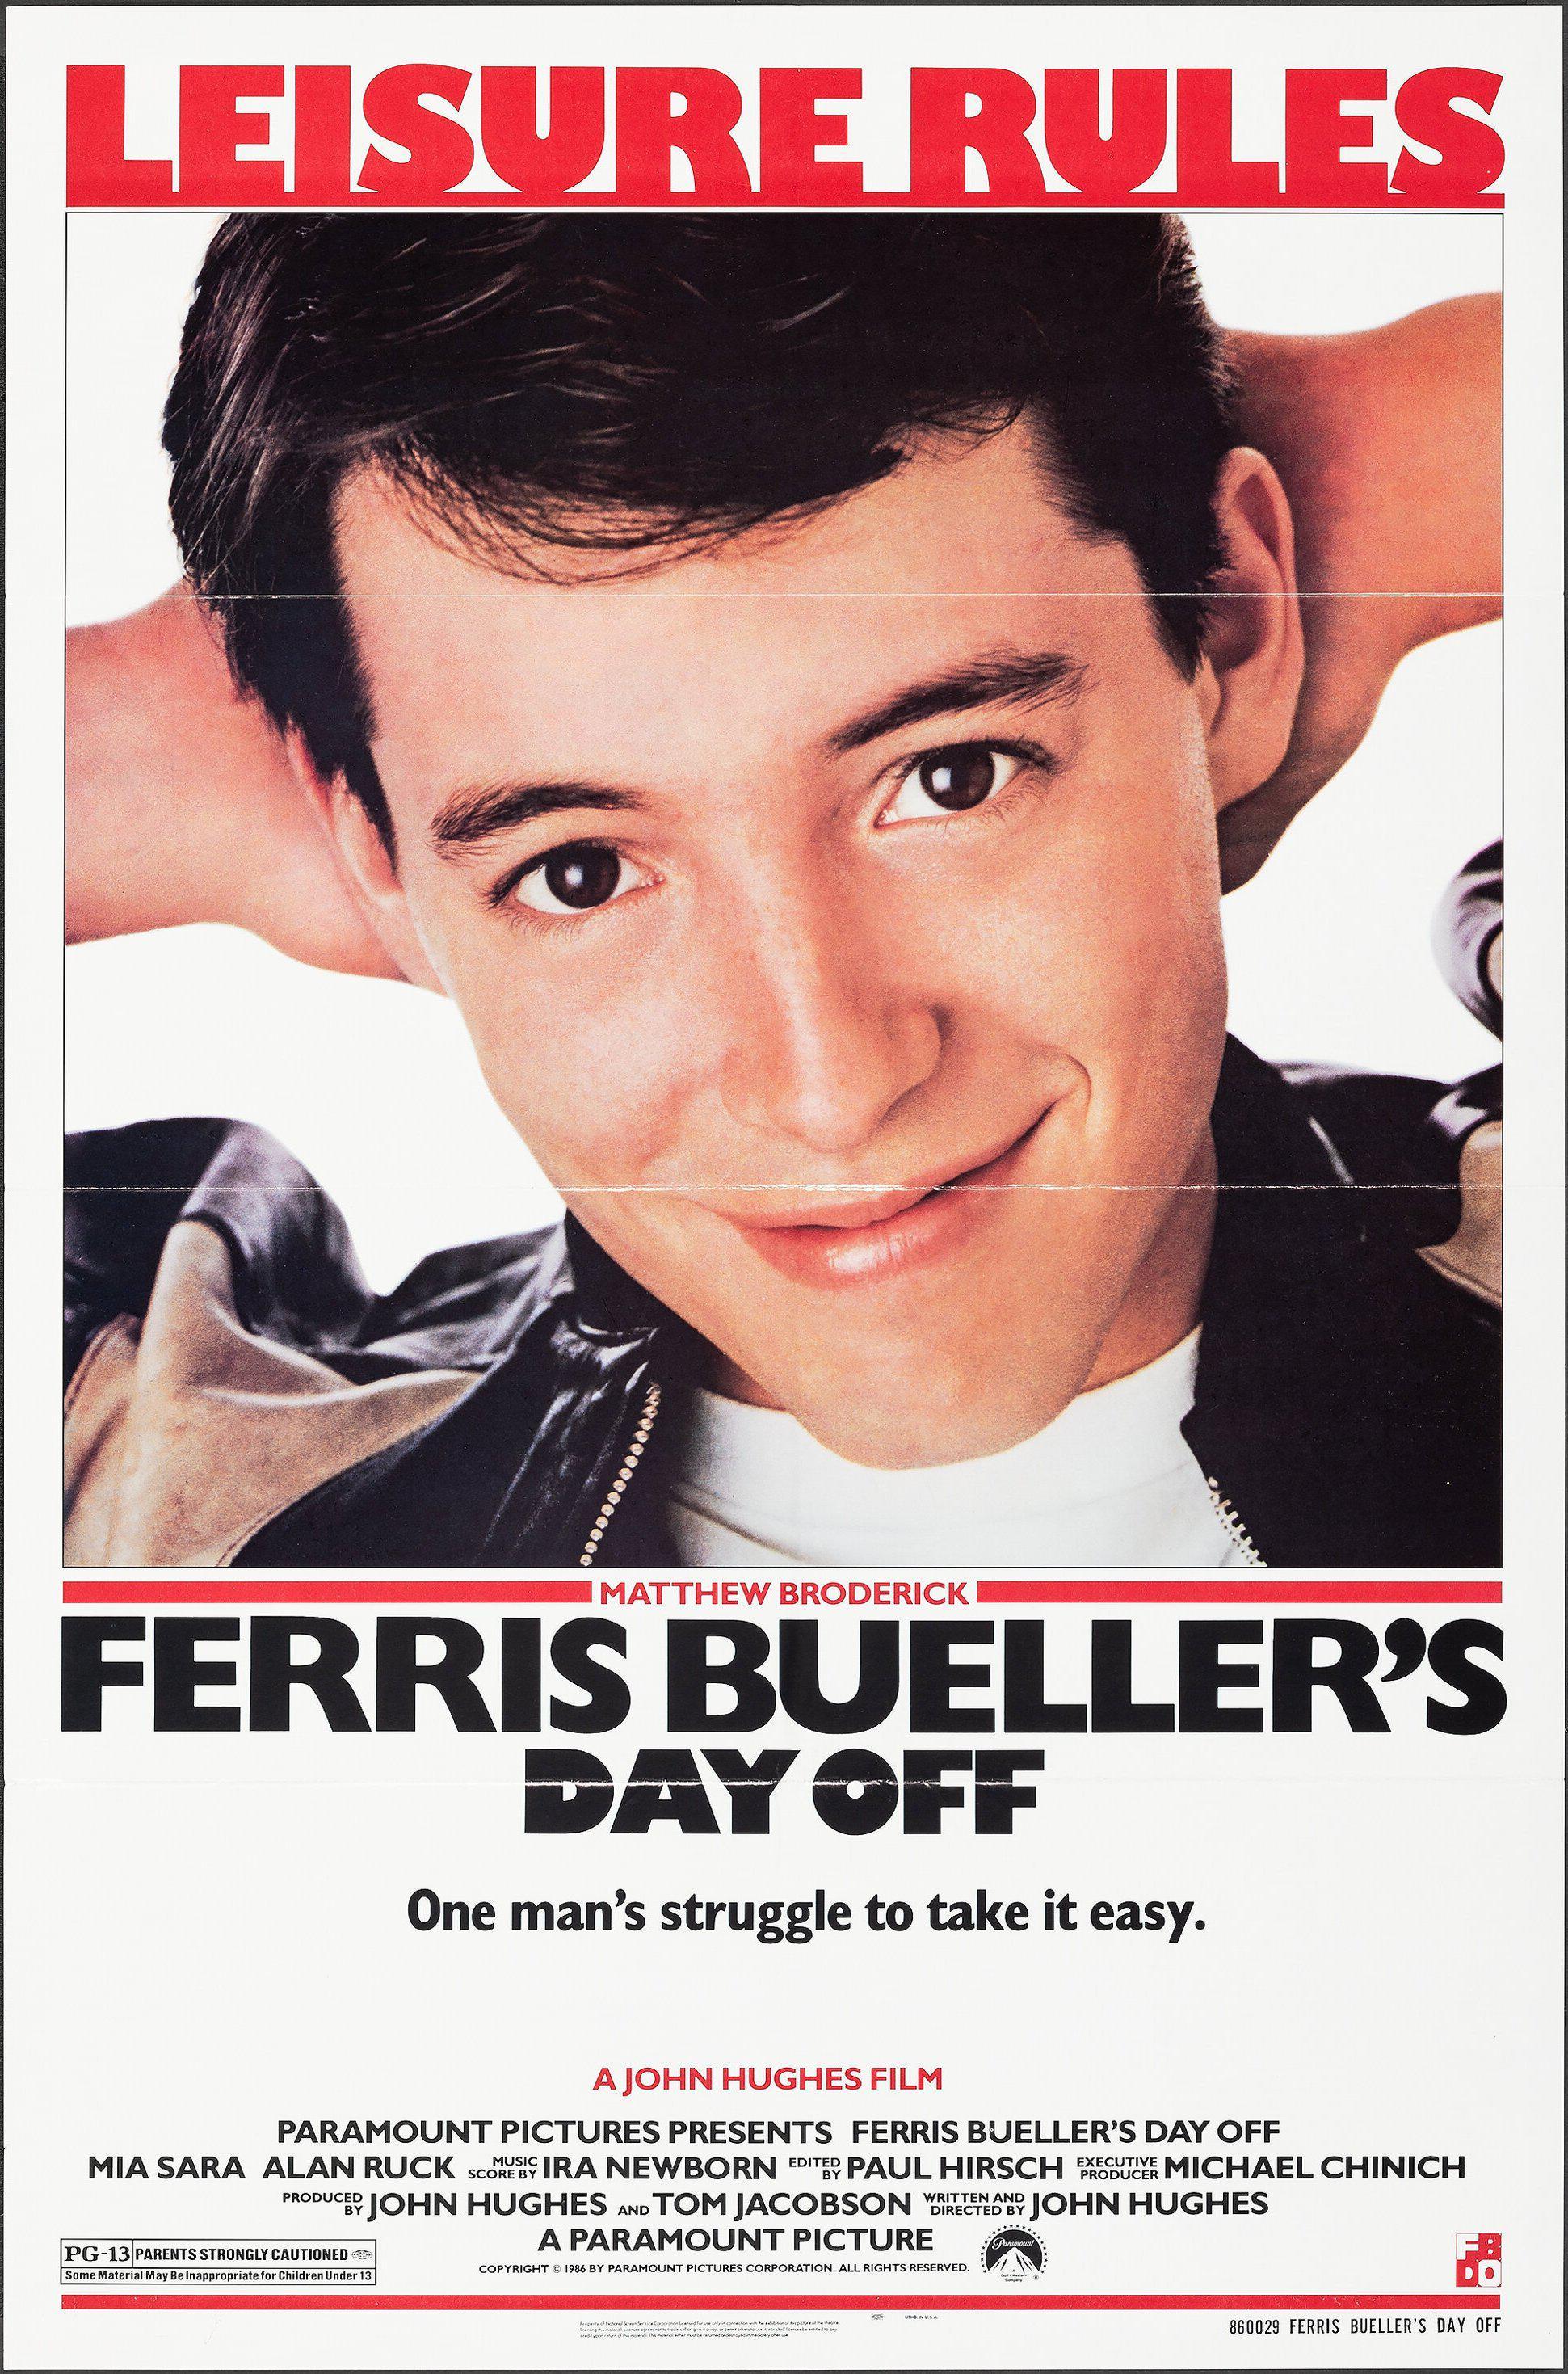 SS3478540) Movie picture of Ferris Bueller's Day Off buy celebrity